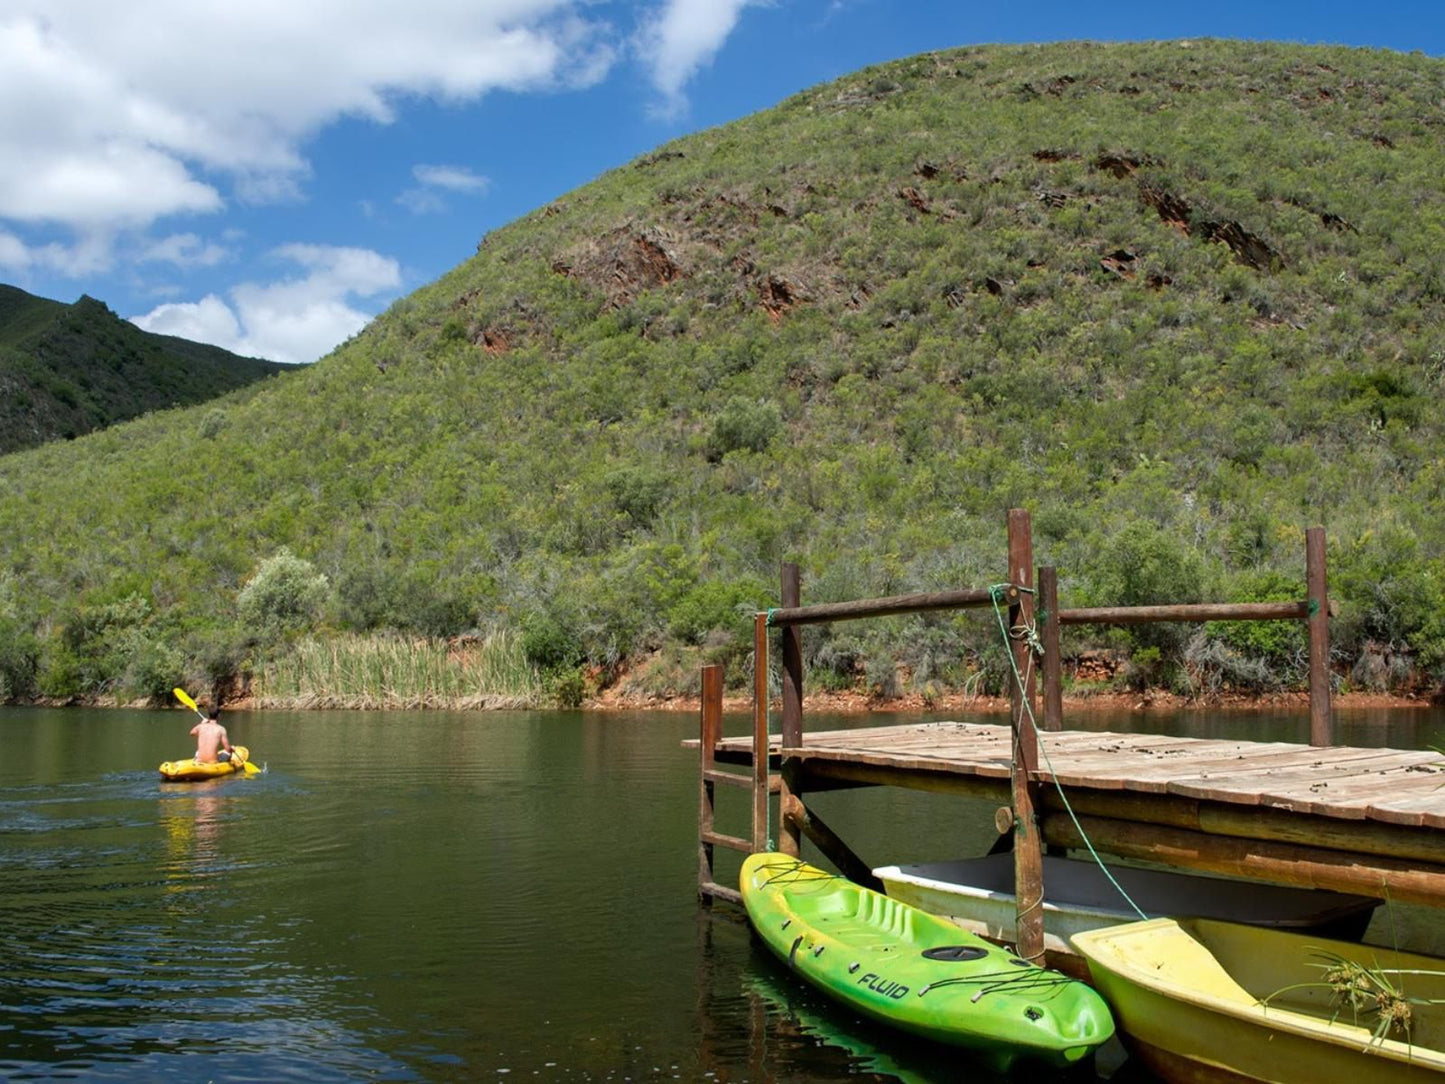 Pat Busch Mountain Reserve Robertson Western Cape South Africa Boat, Vehicle, Canoe, River, Nature, Waters